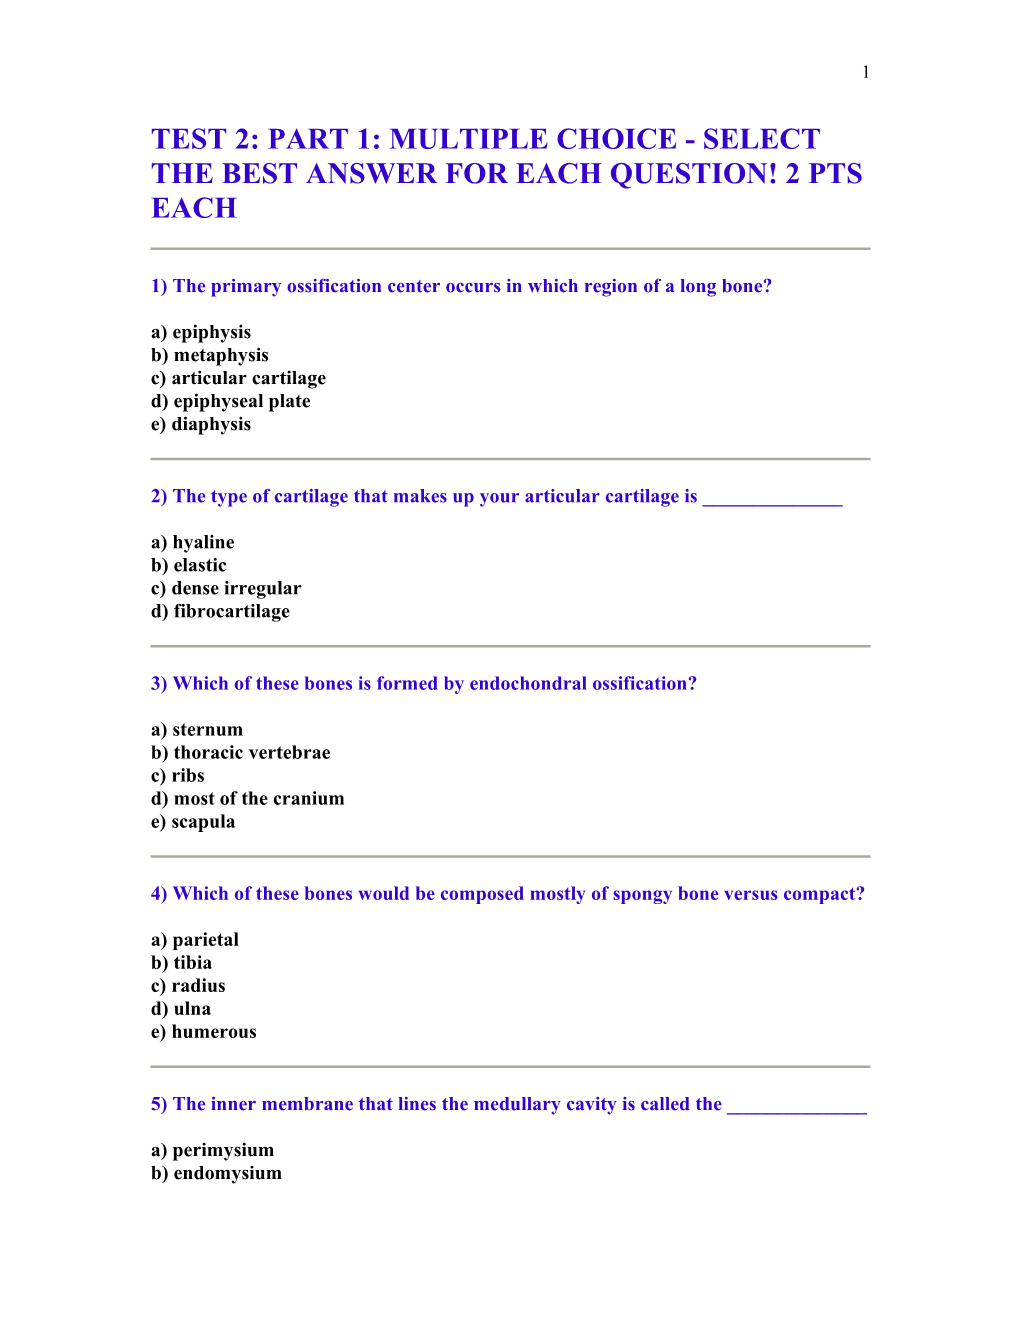 Test 2: Part 1: Multiple Choice - Select the Best Answer for Each Question